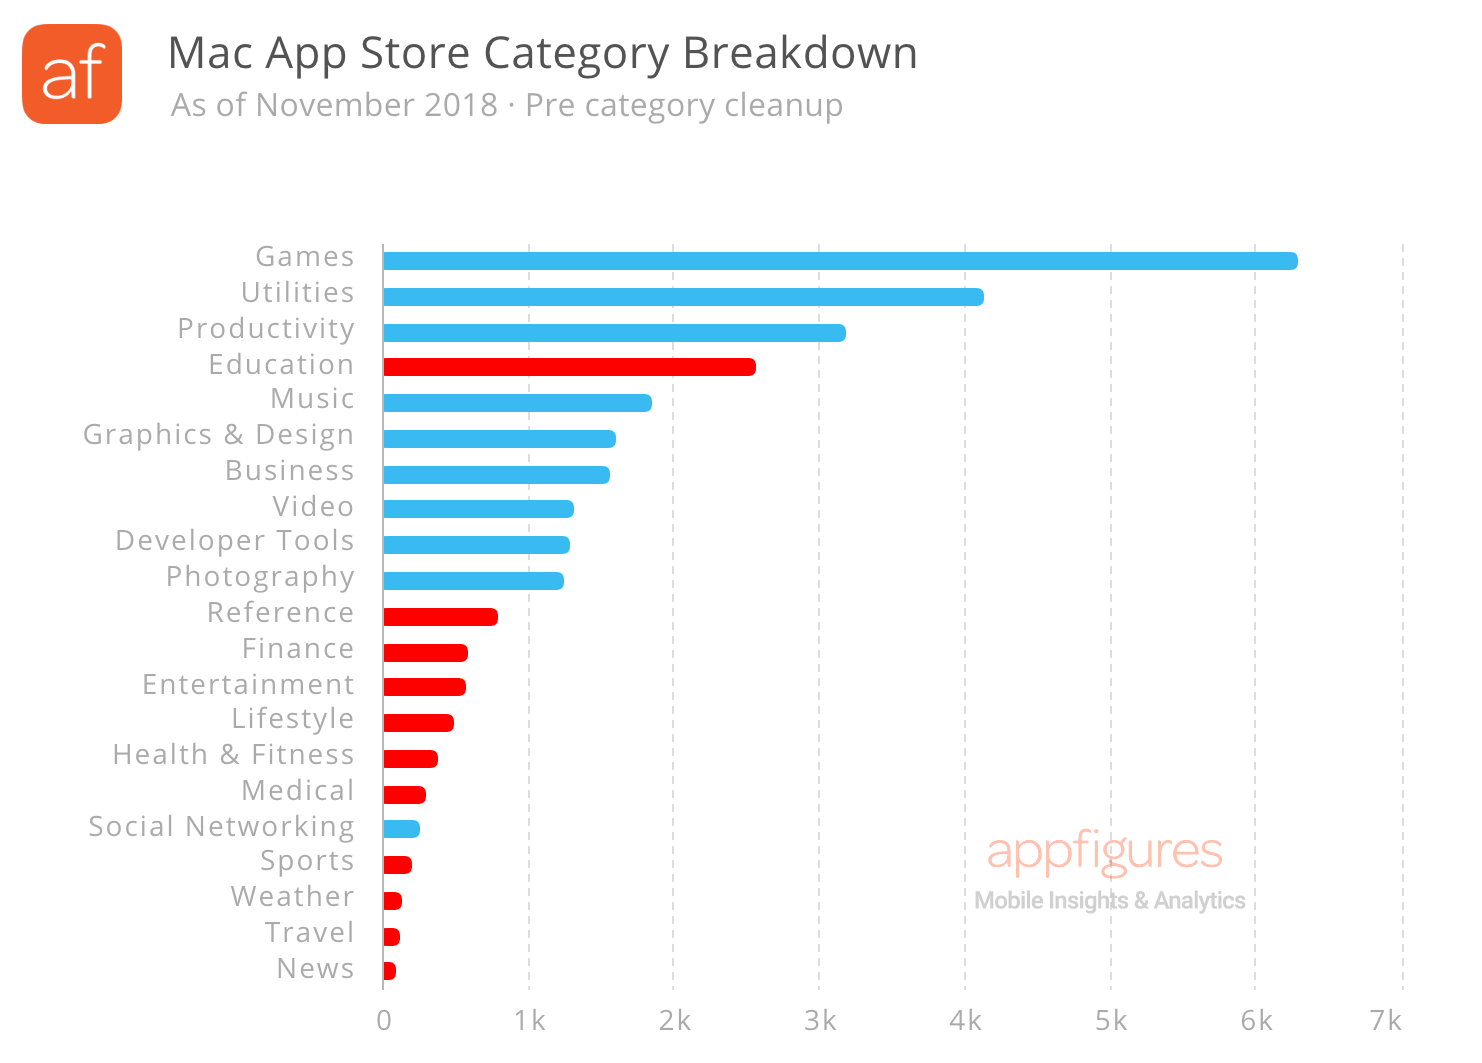 How Many Apps Are in the Mac App Store by Category | Appfigures